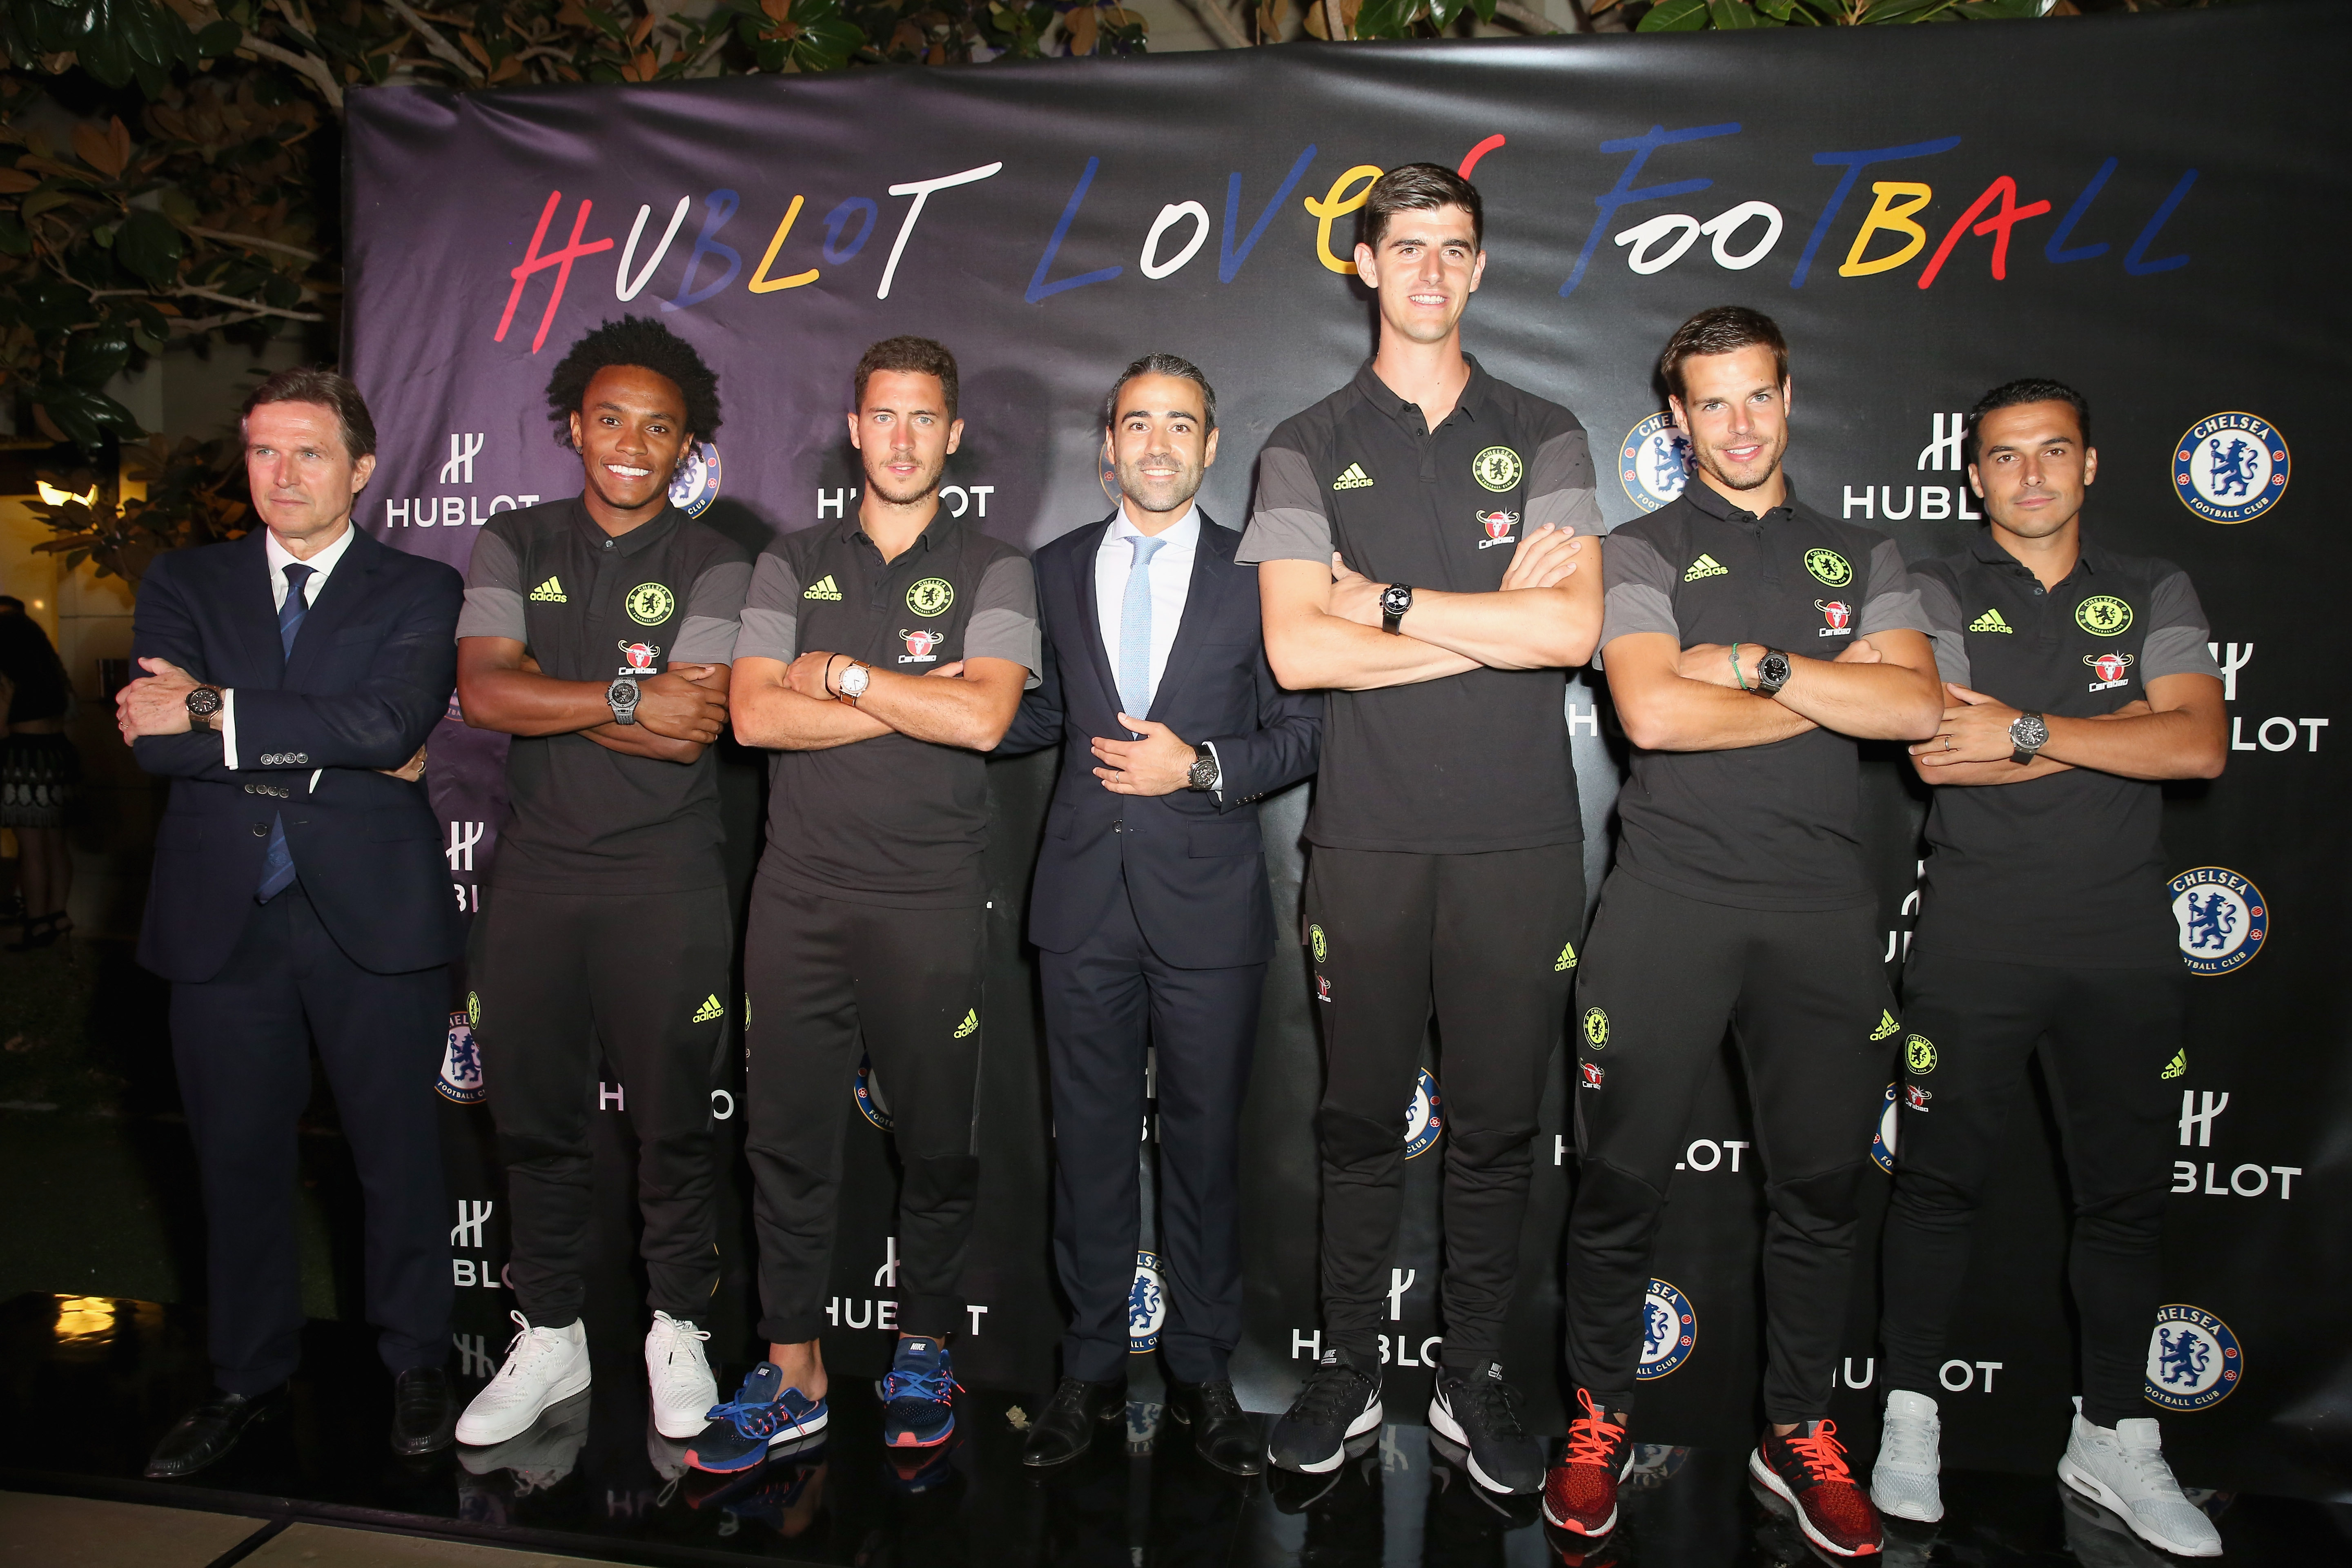 Hublot Welcomes Chelsea FC To Los Angeles